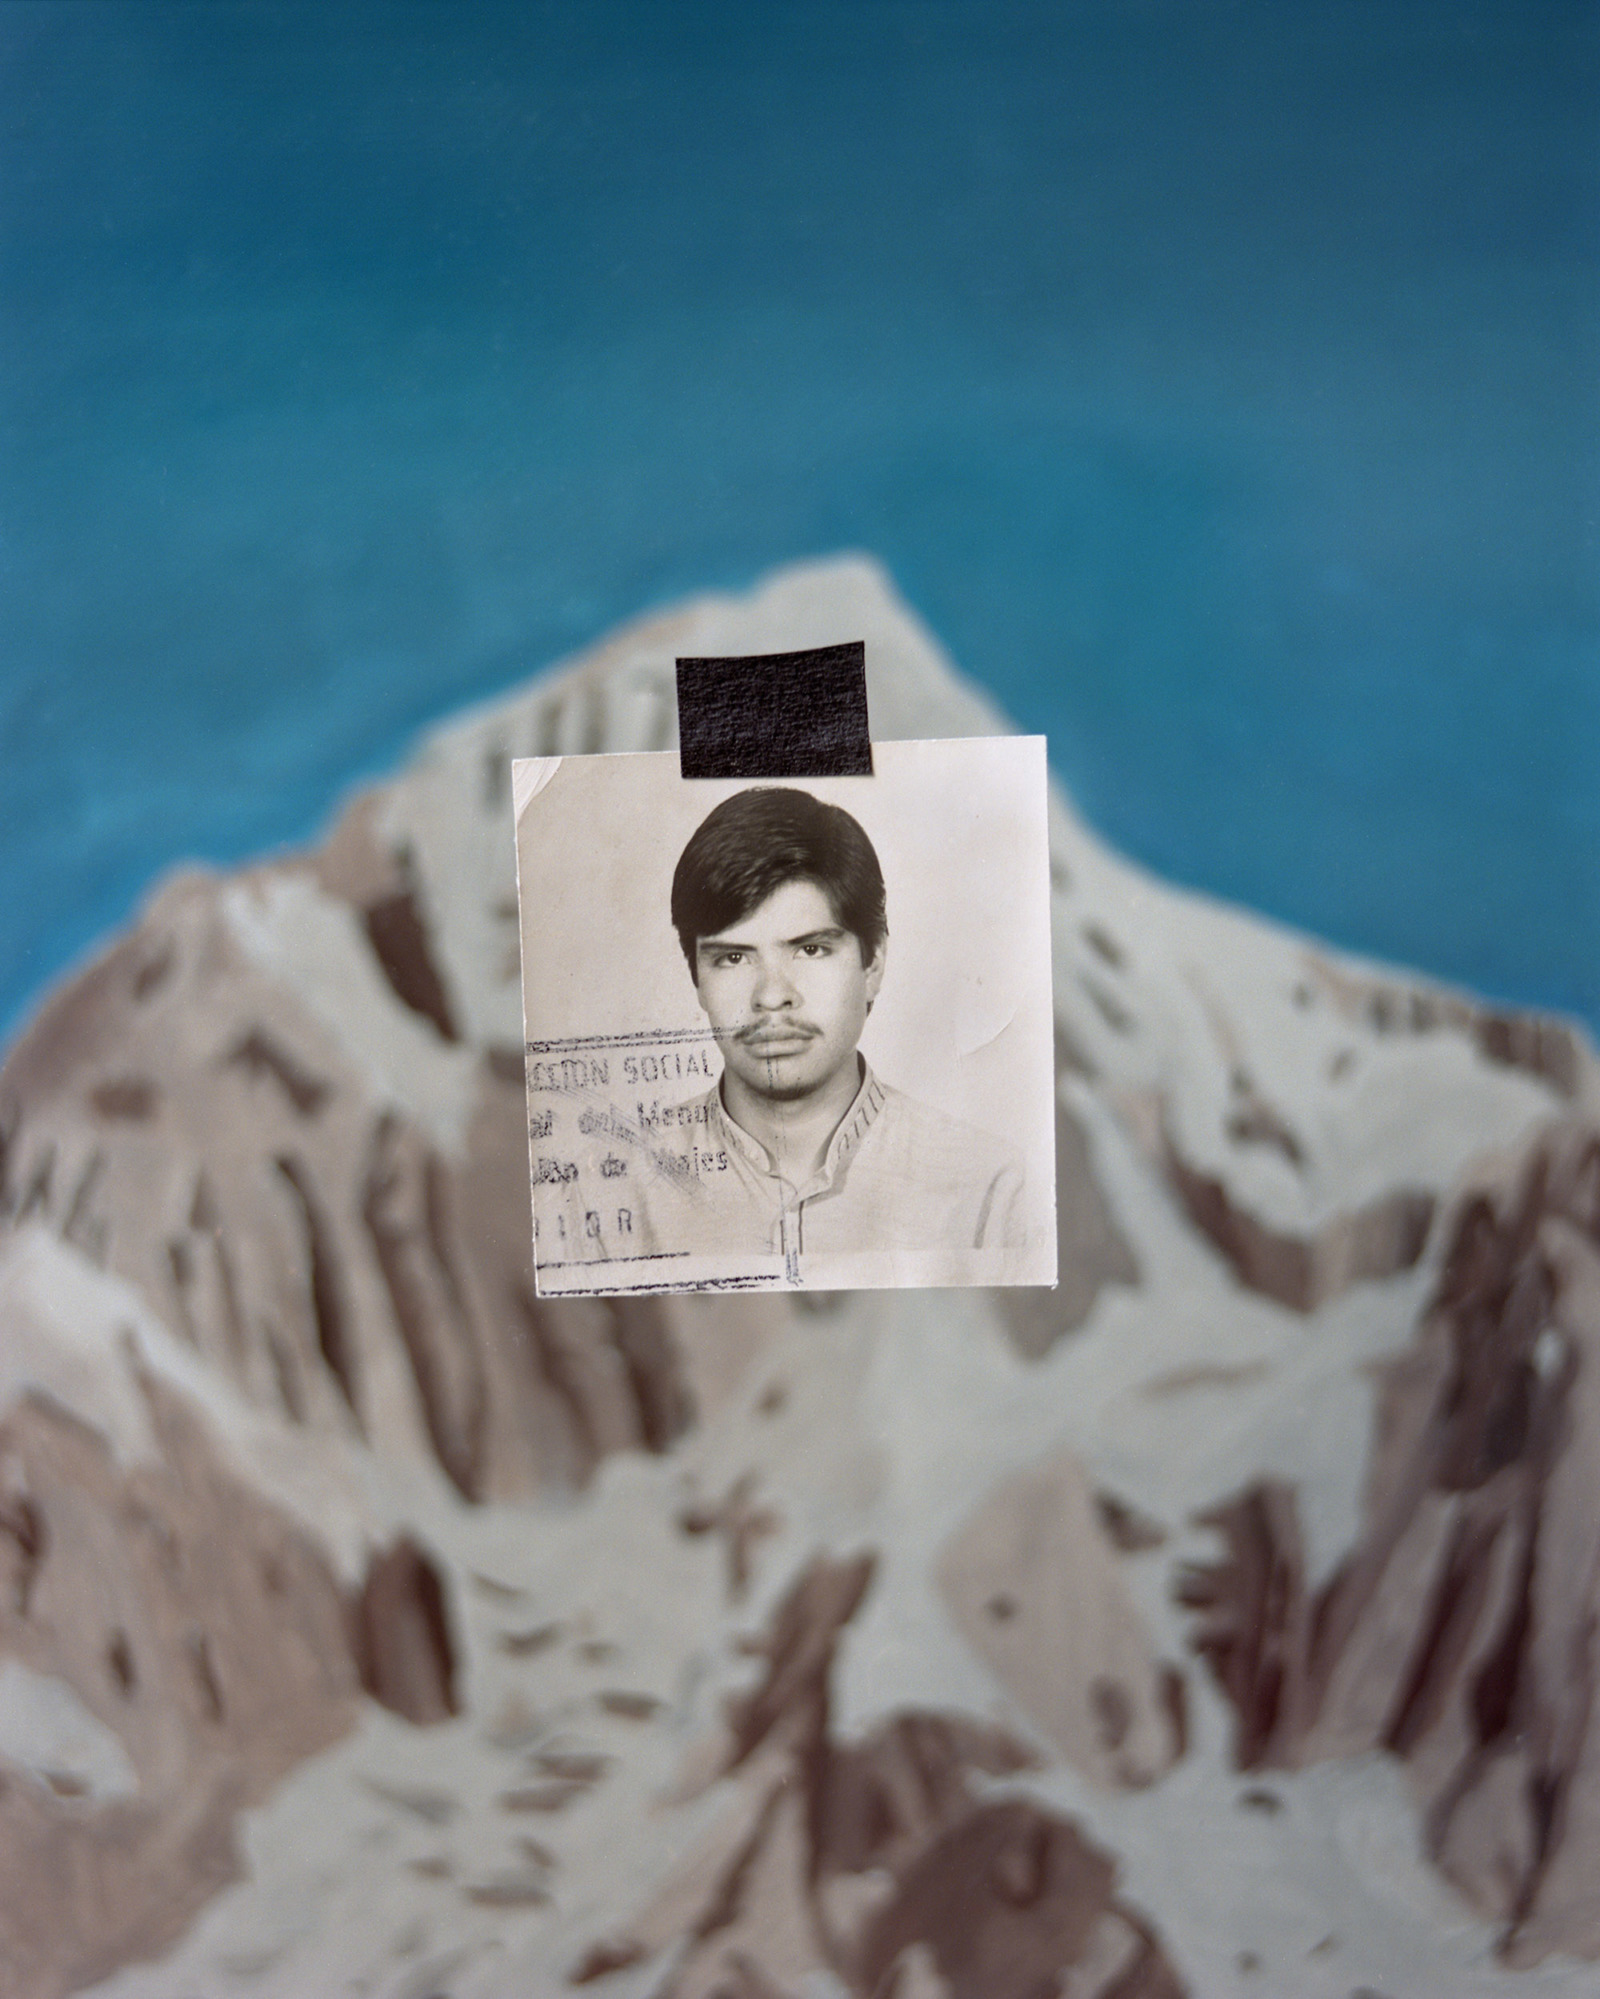 An old passport photo has been cut out and pasted on top of an image of a snow-capped mountain.